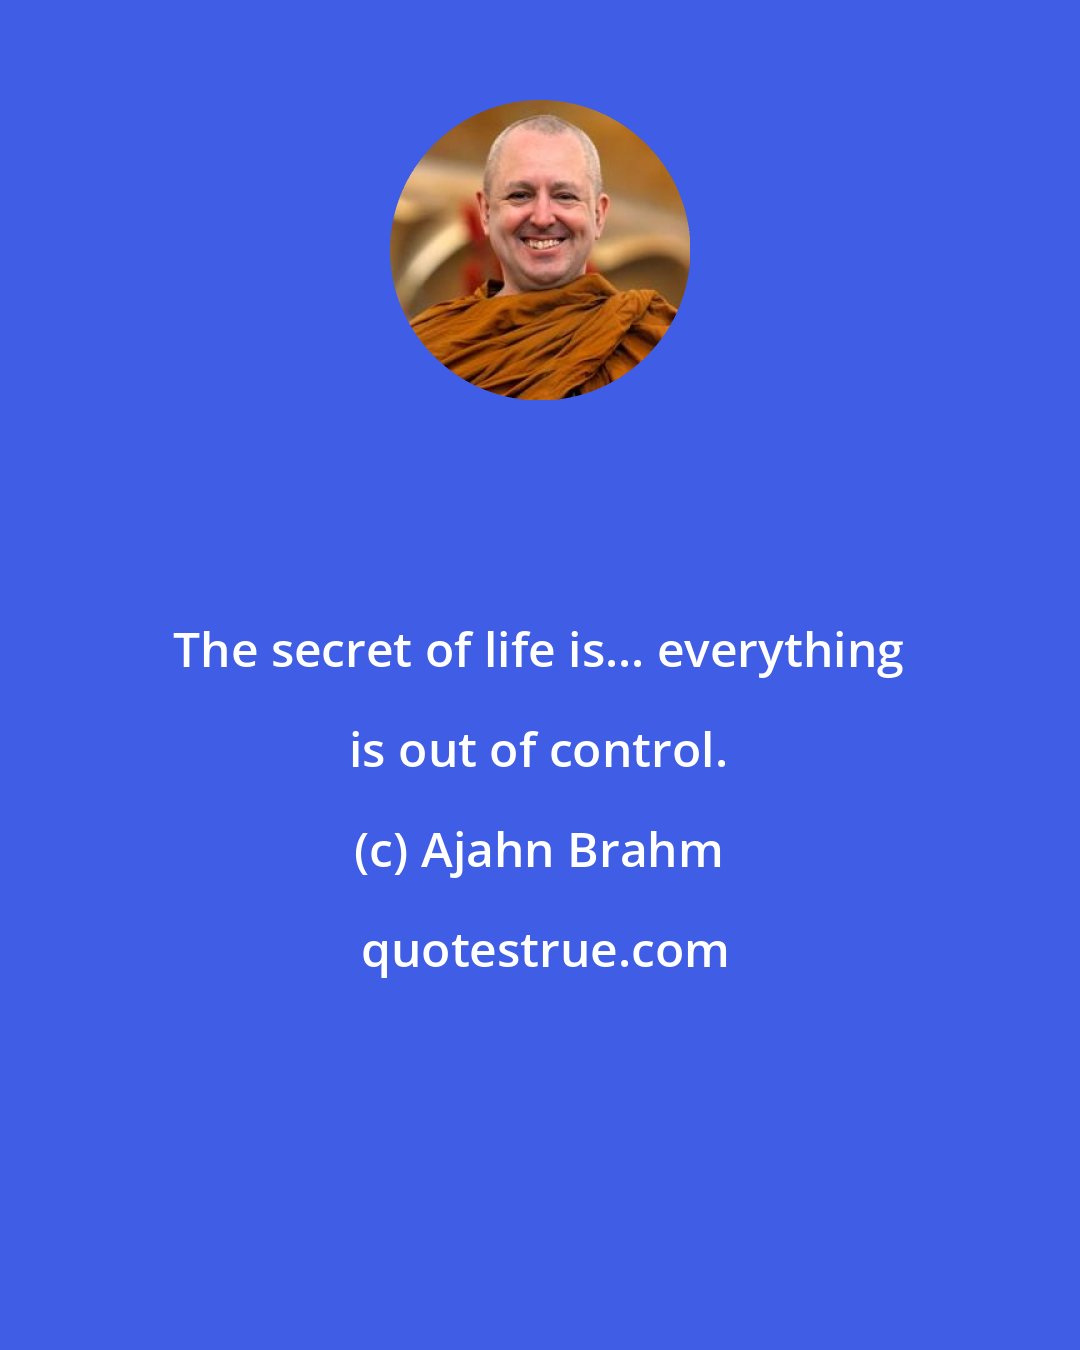 Ajahn Brahm: The secret of life is... everything is out of control.